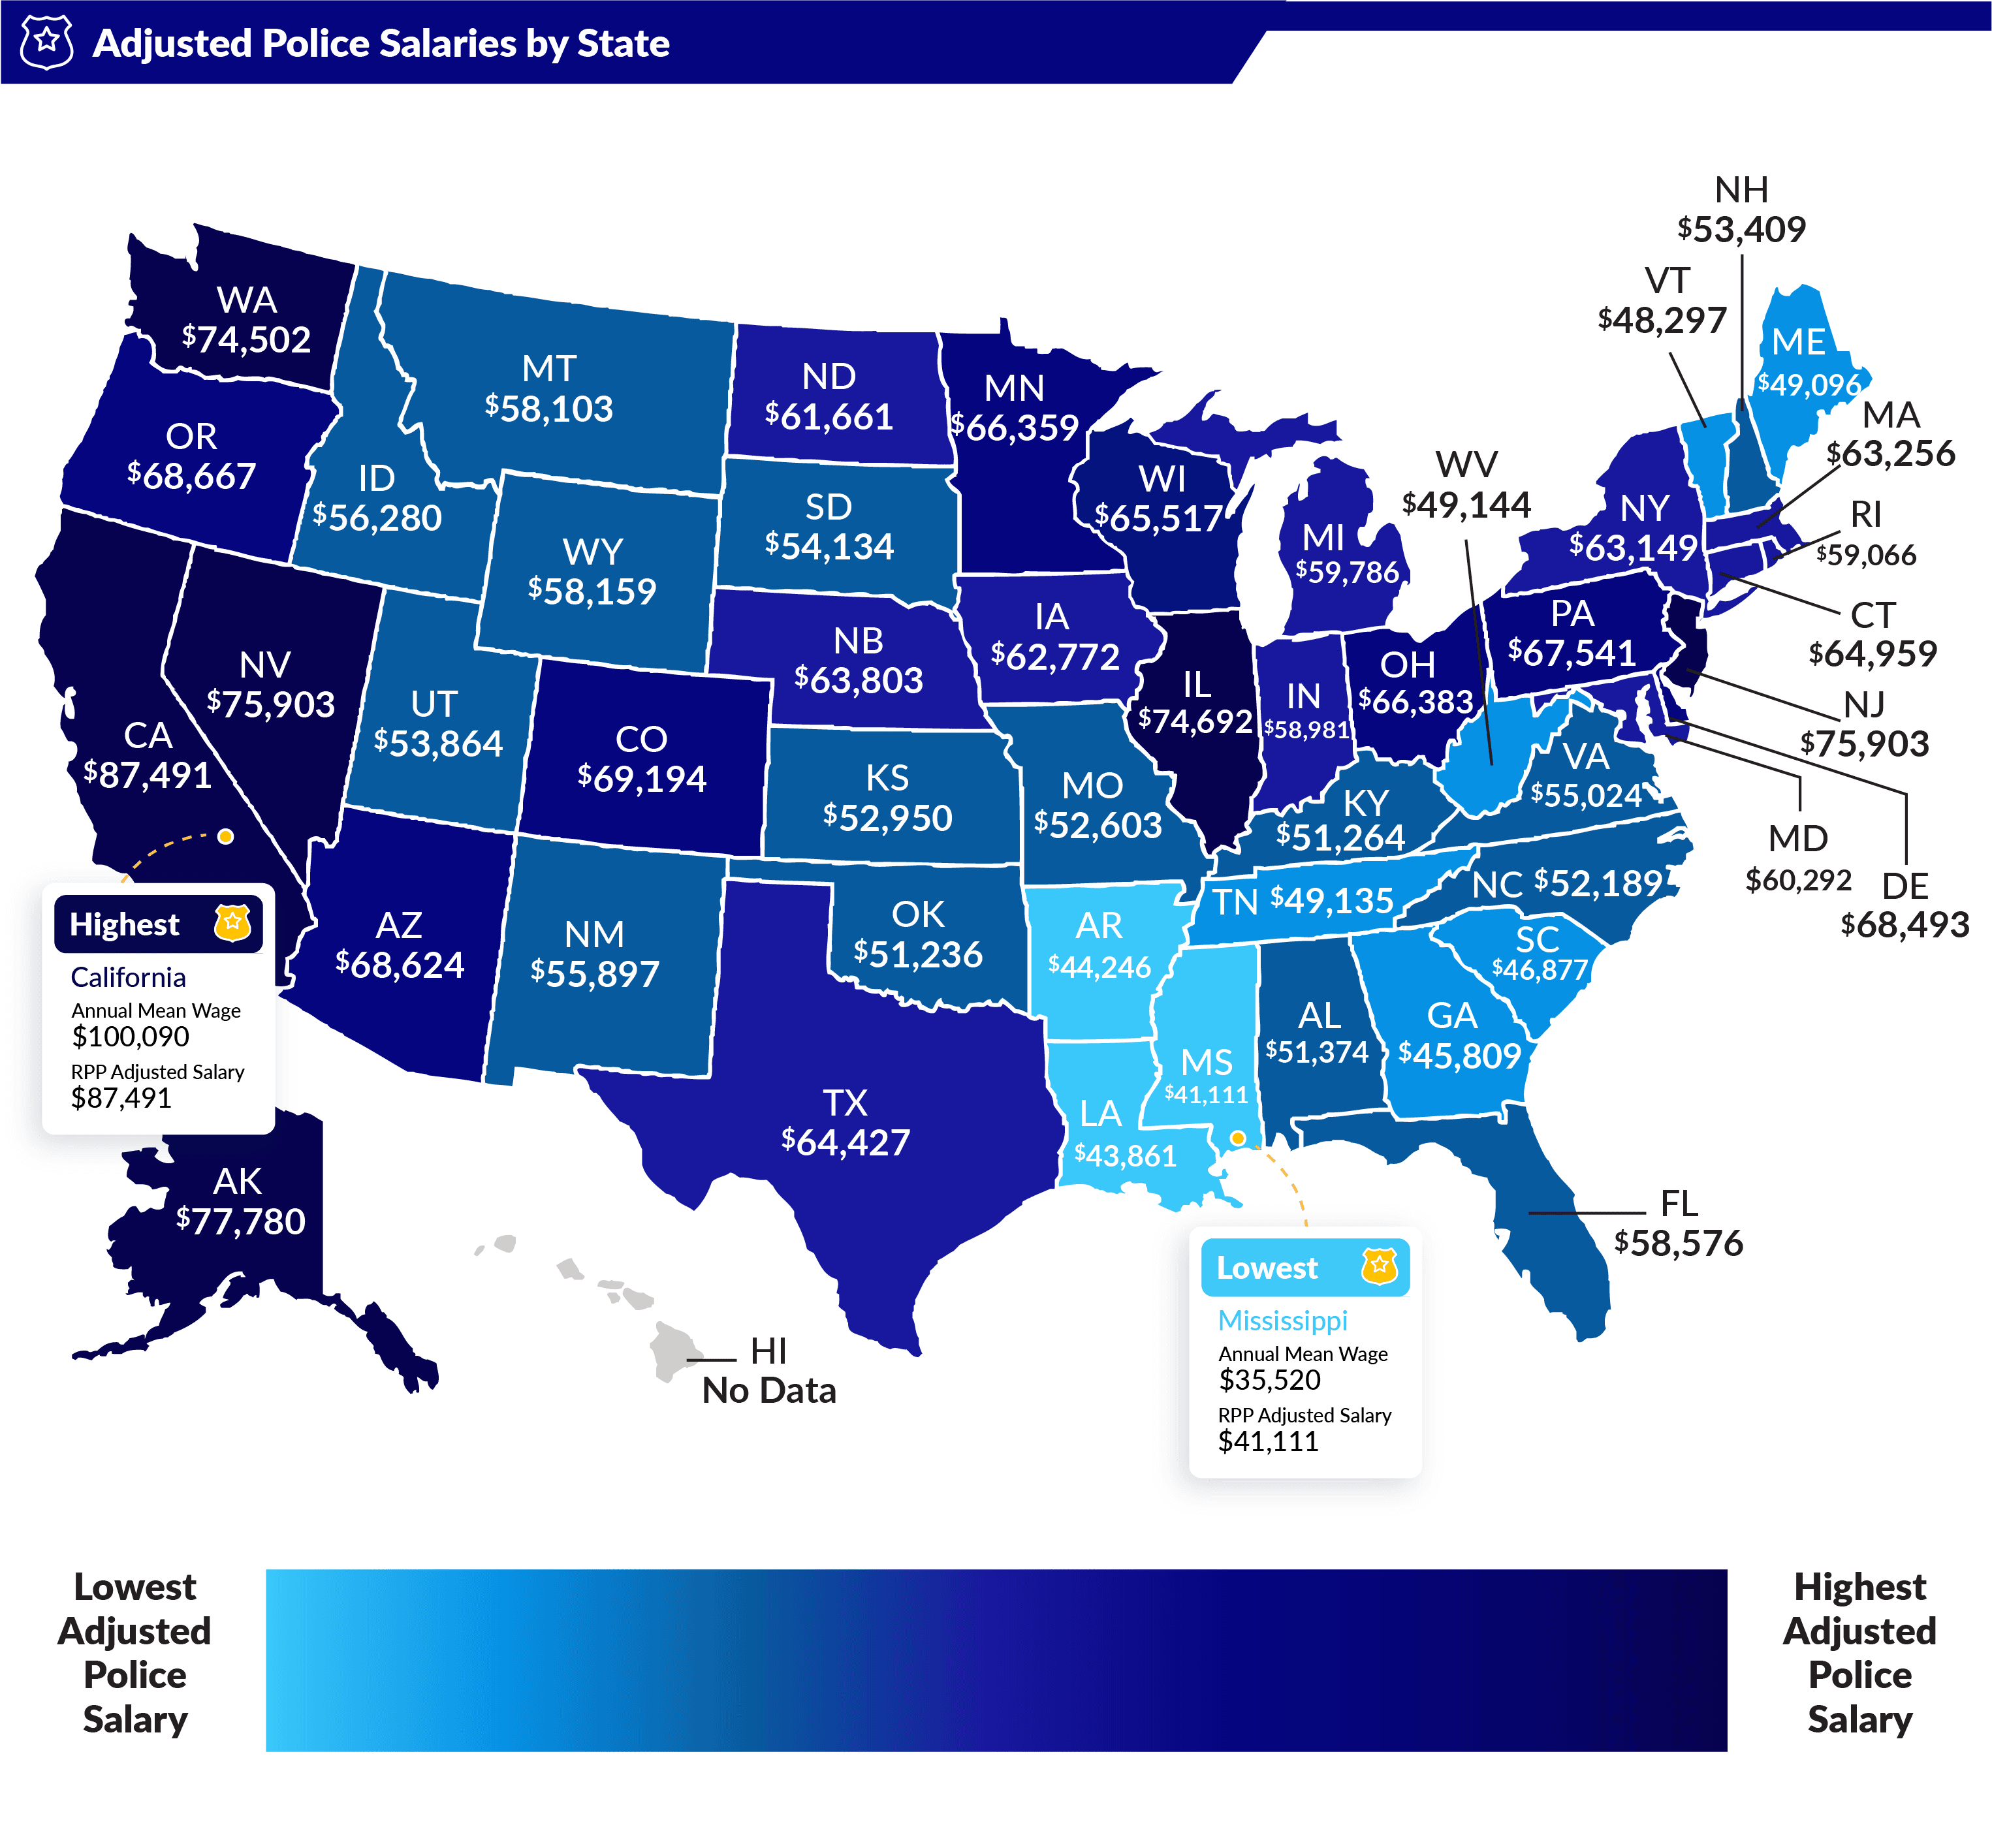 Map of United States showing adjusted police salaries by state